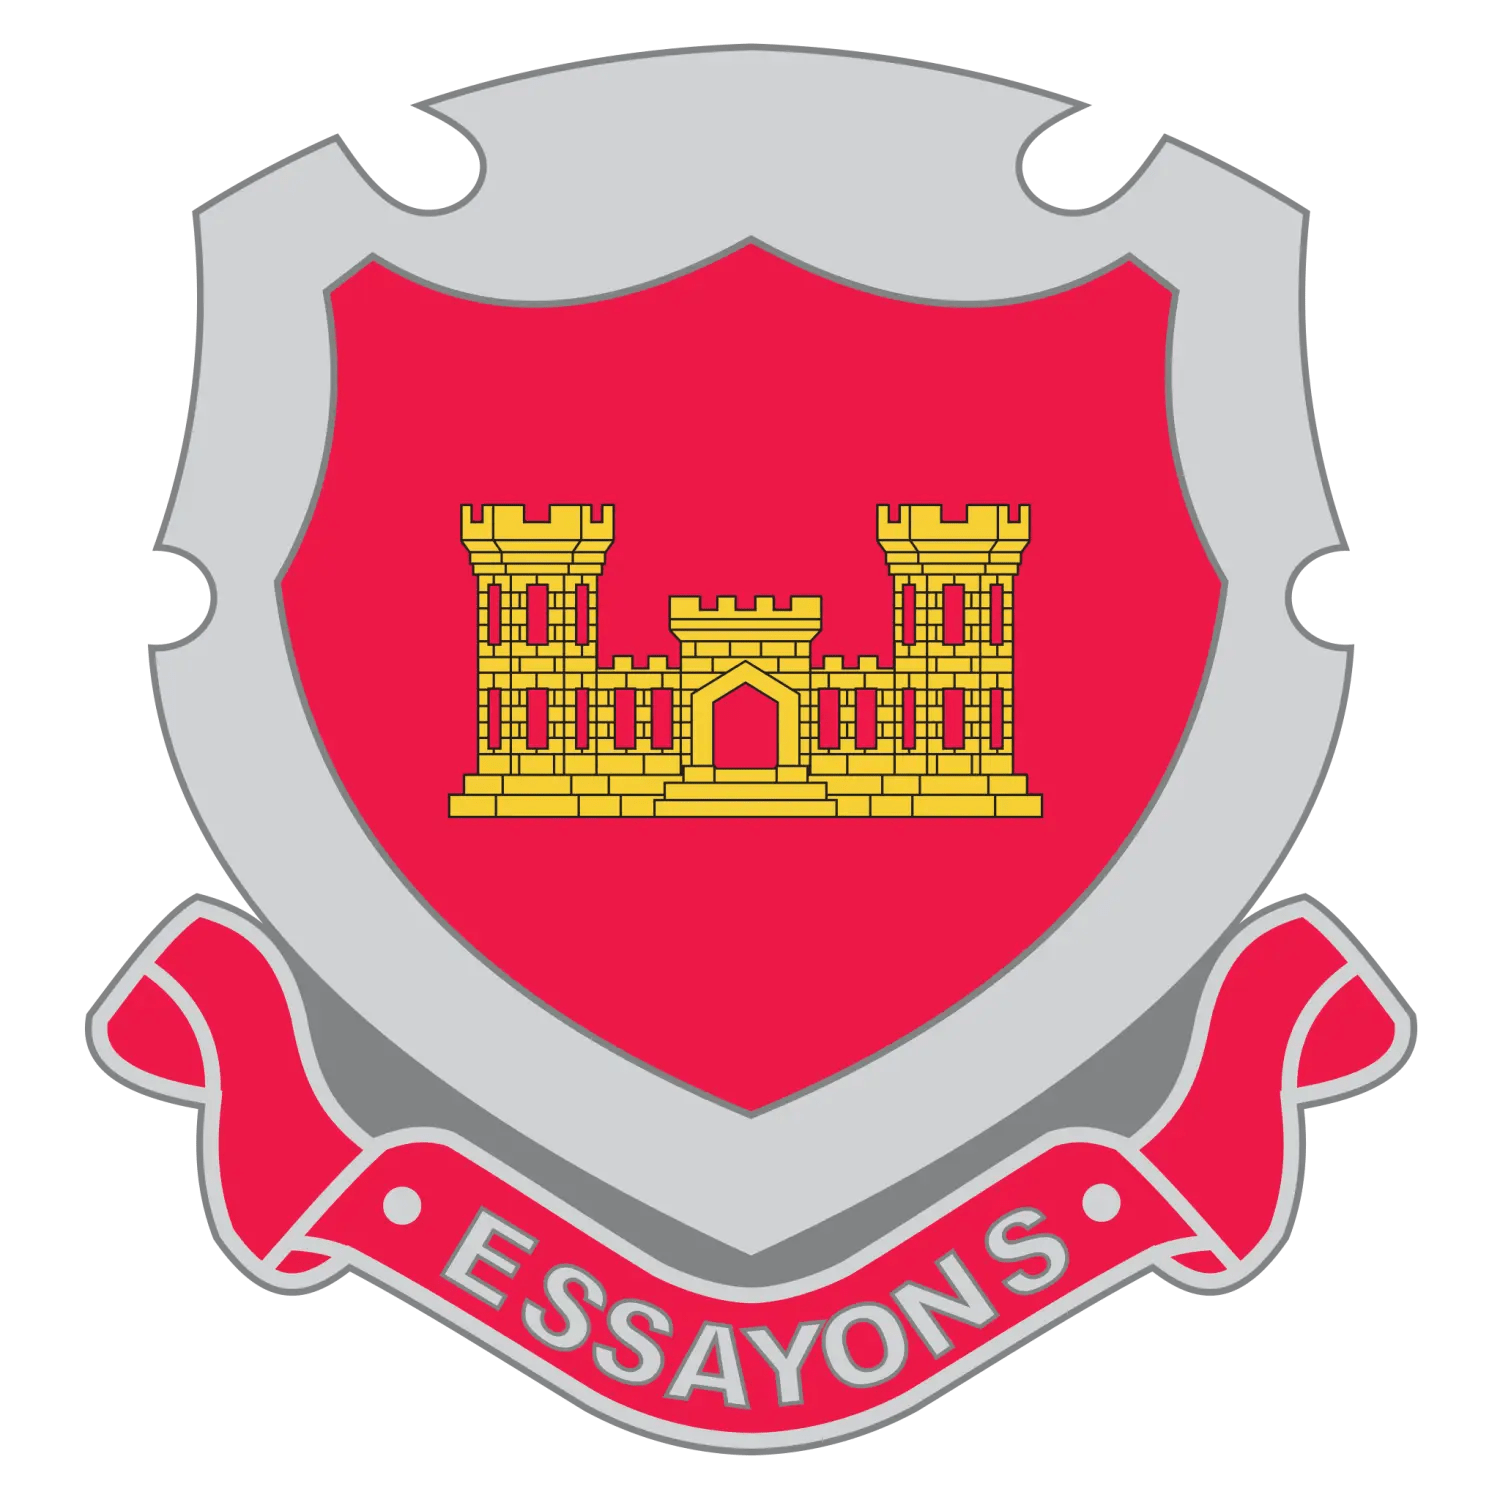 Essayons: The U.S. Army Corps of Engineers Motto and Their Military Role Throughout History - Tactically Acquired